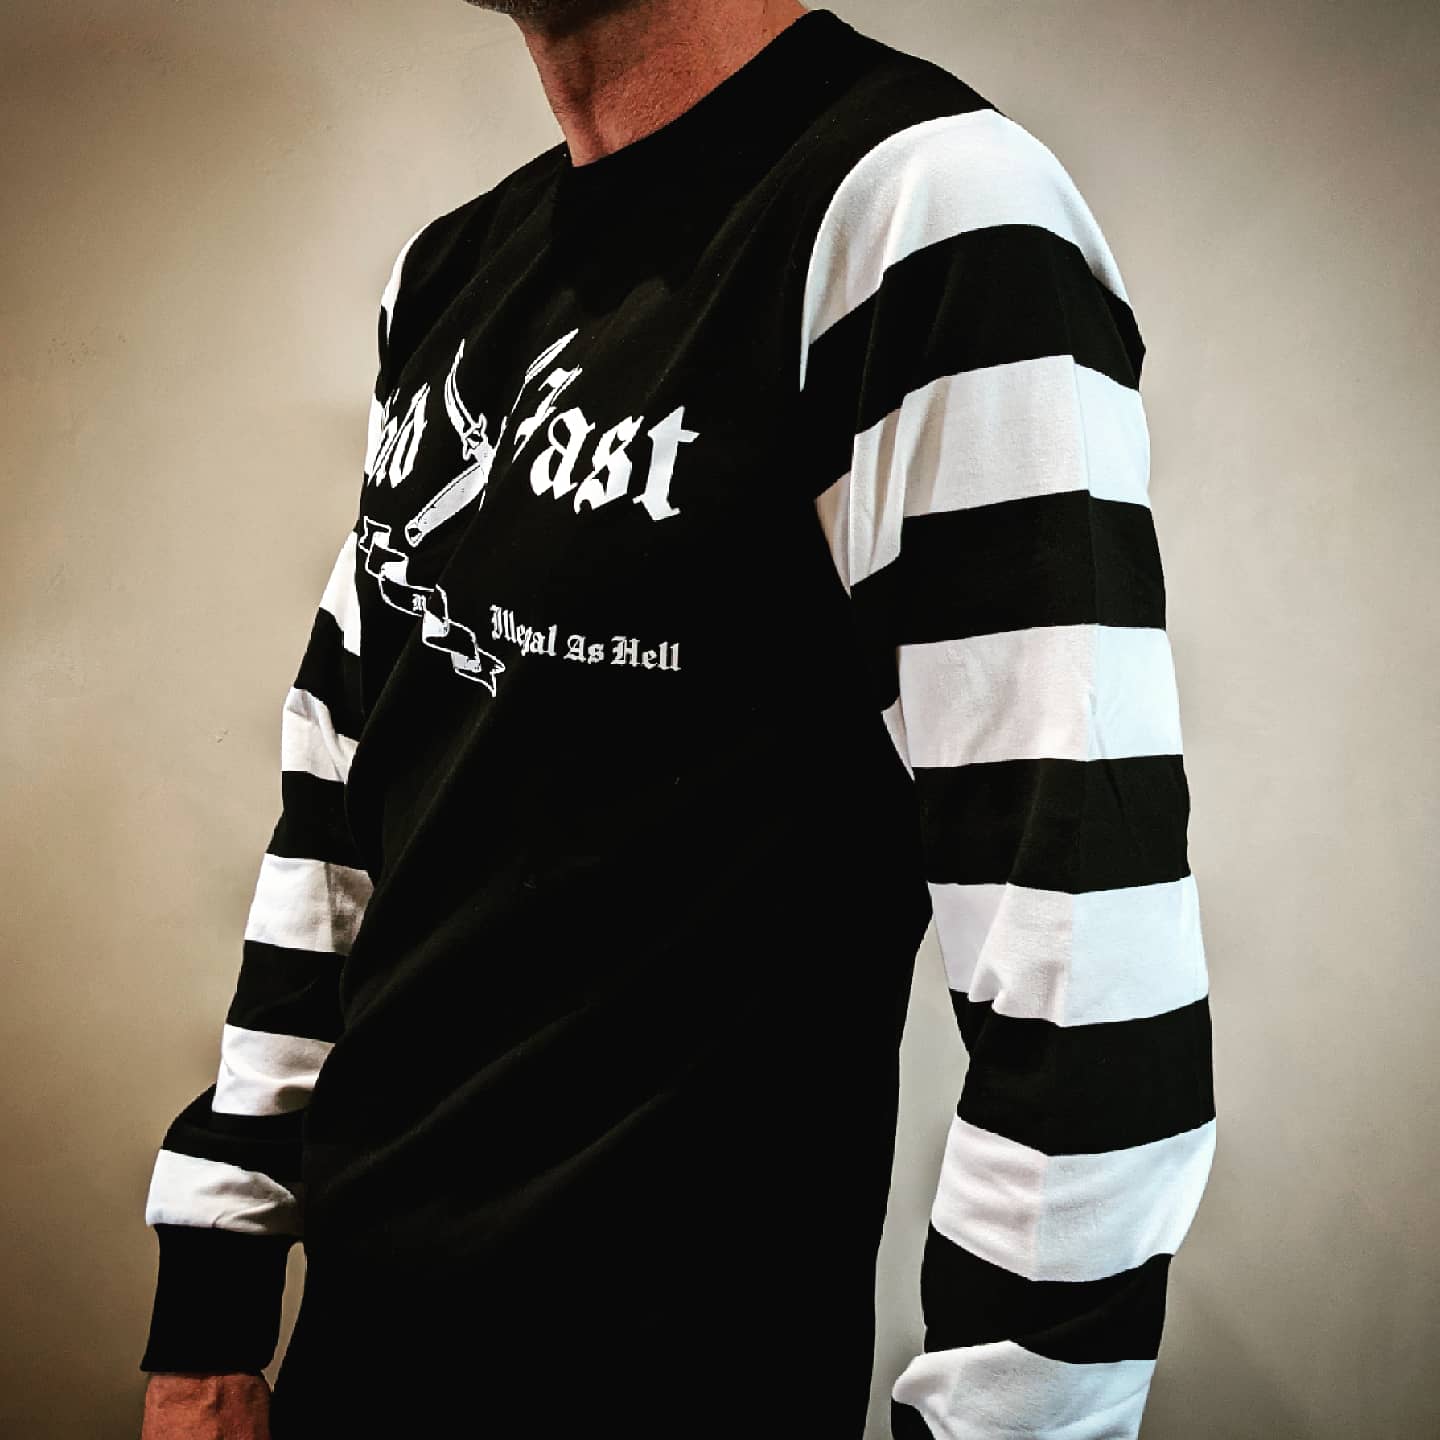 Non Stock Motorcycle Wide Black and White Striped Long Sleeve T-Shirt | Bronson Black/White / S